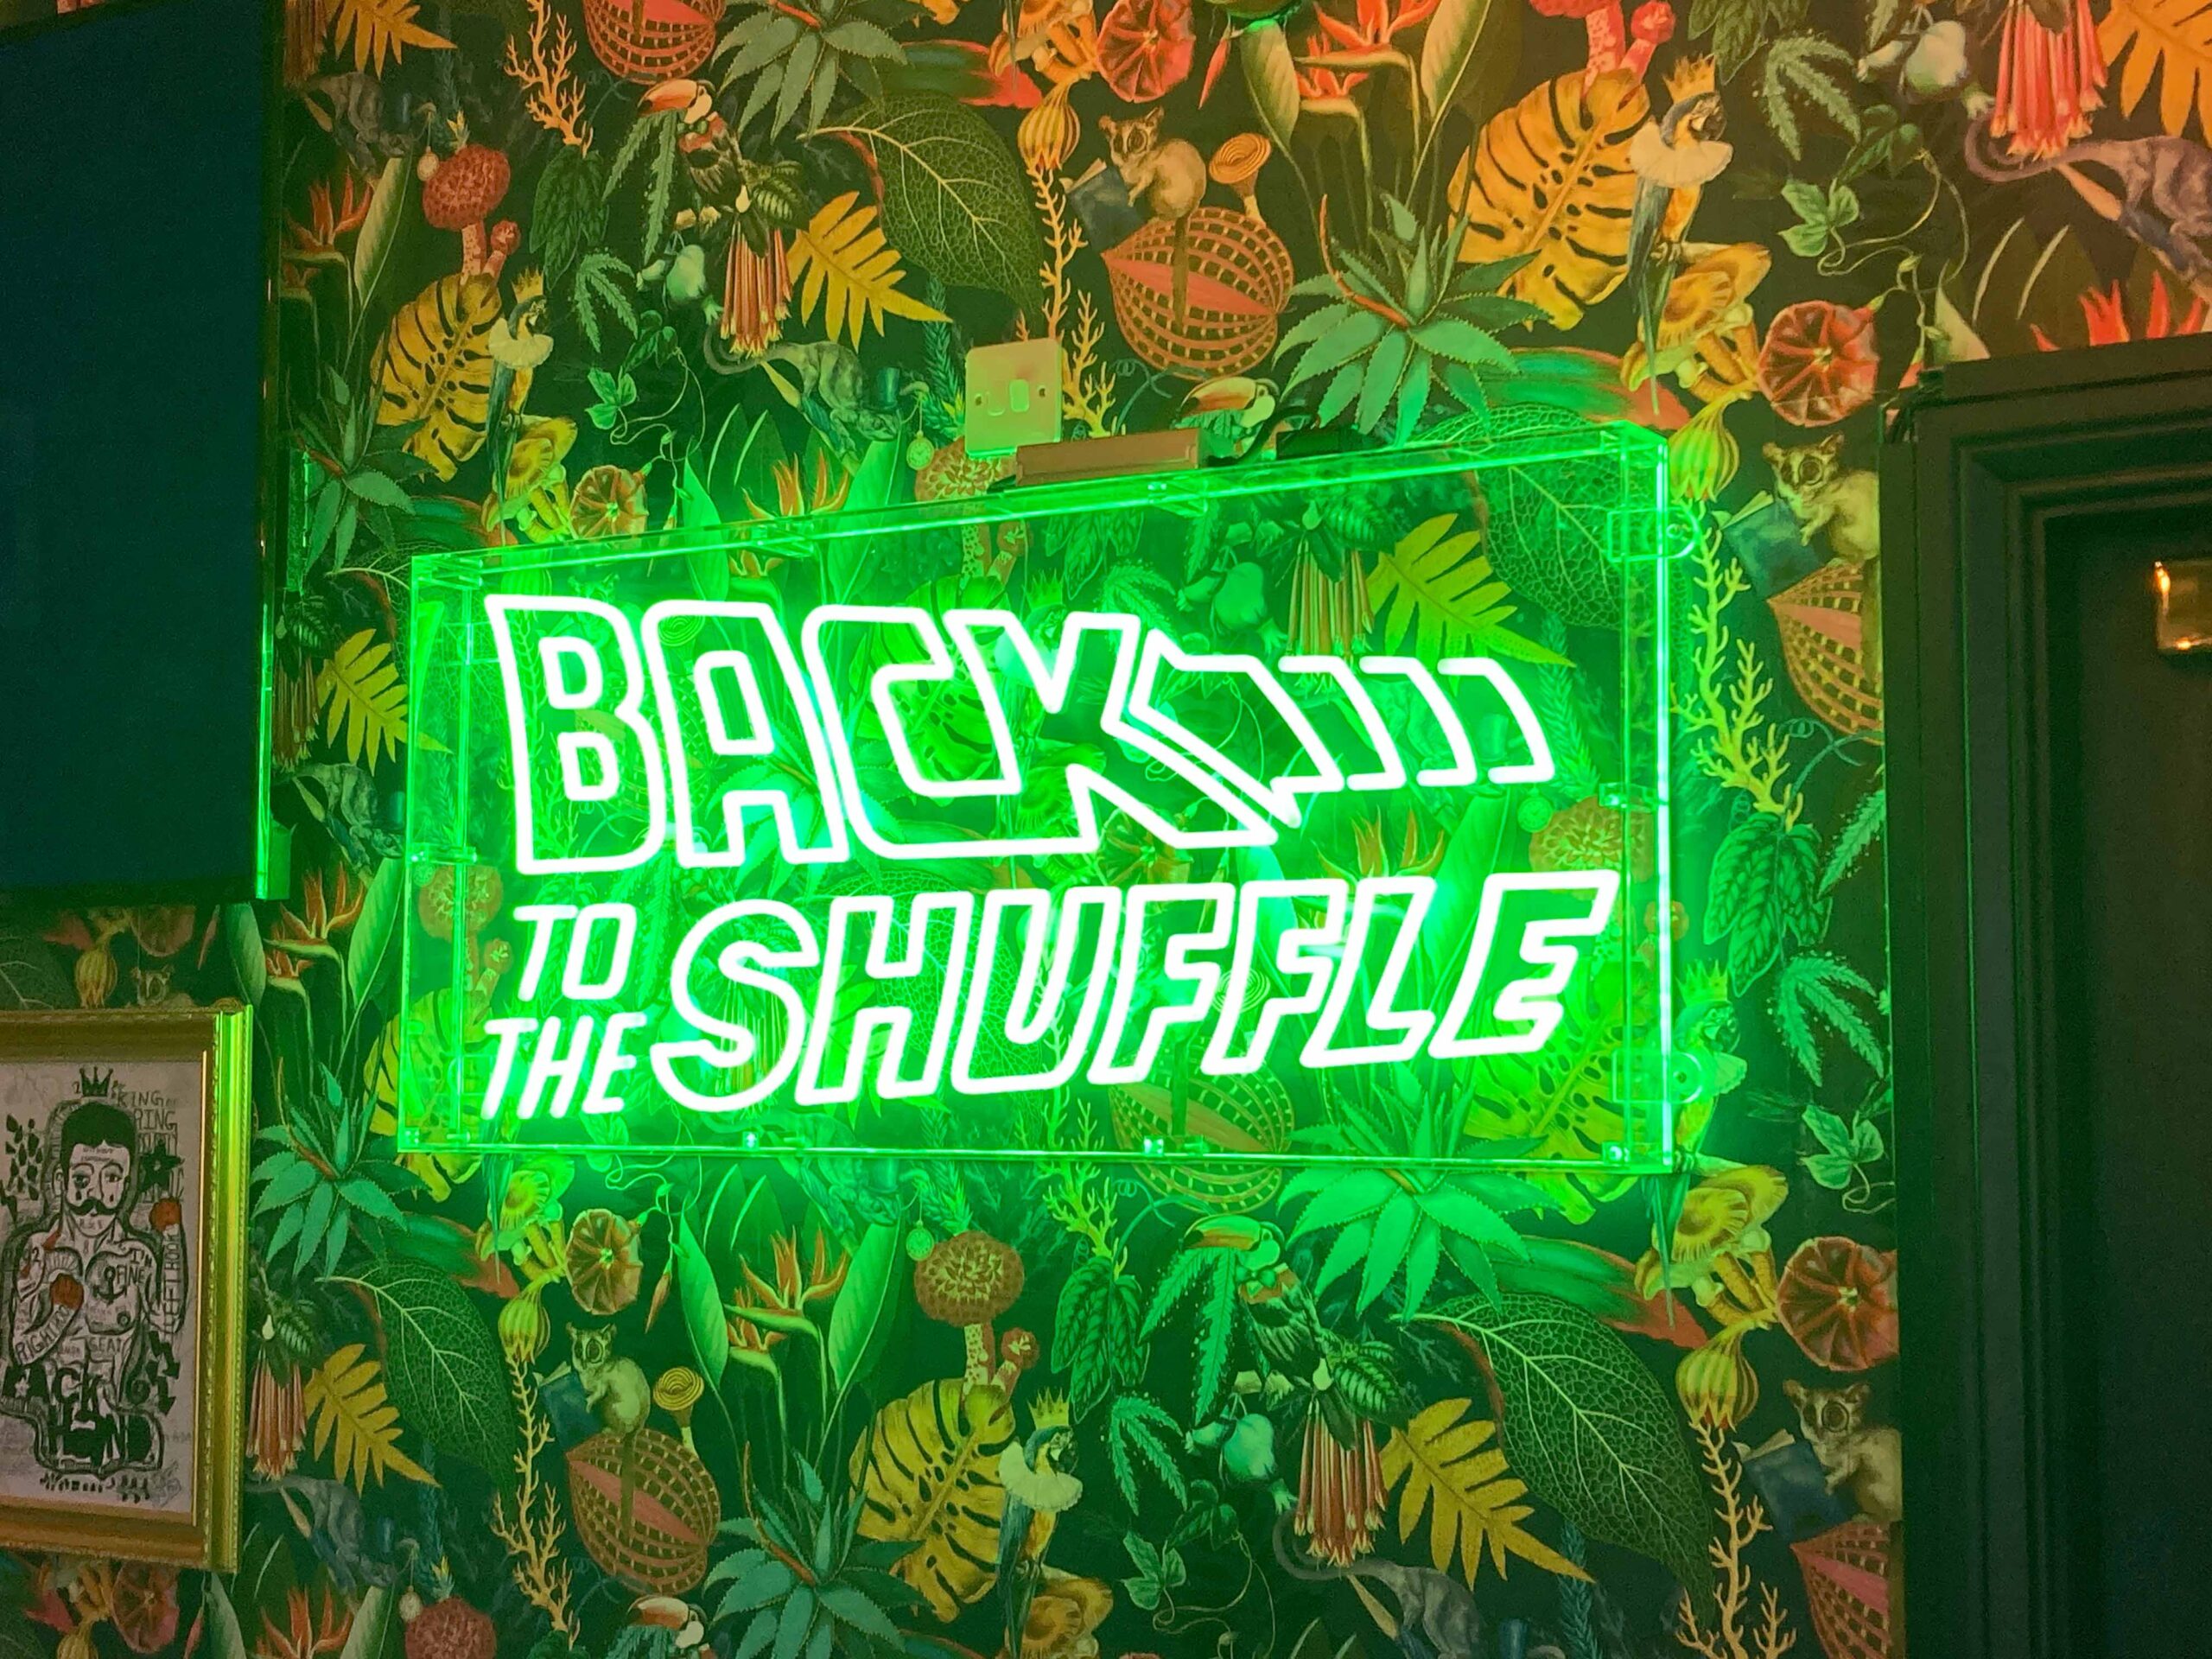 Back to the shuffle - Bright green neon sign